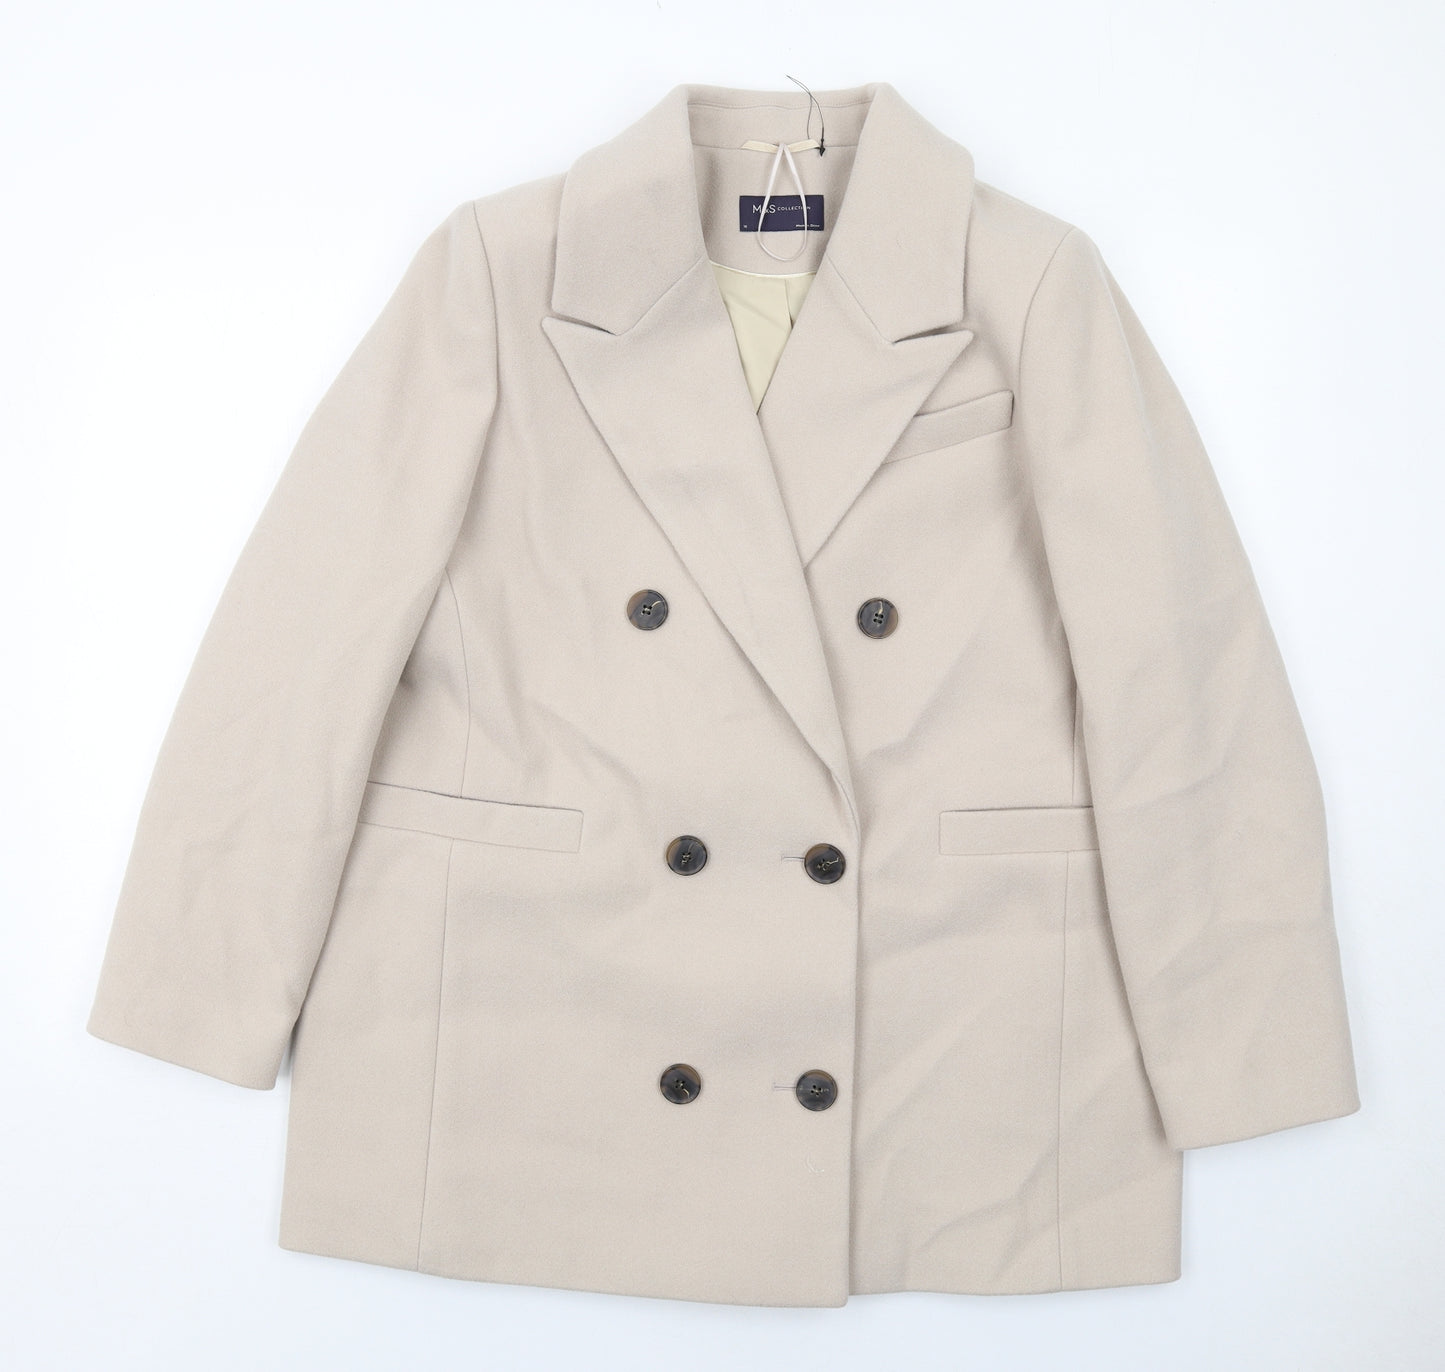 Marks and Spencer Womens Beige Pea Coat Coat Size 16 Button